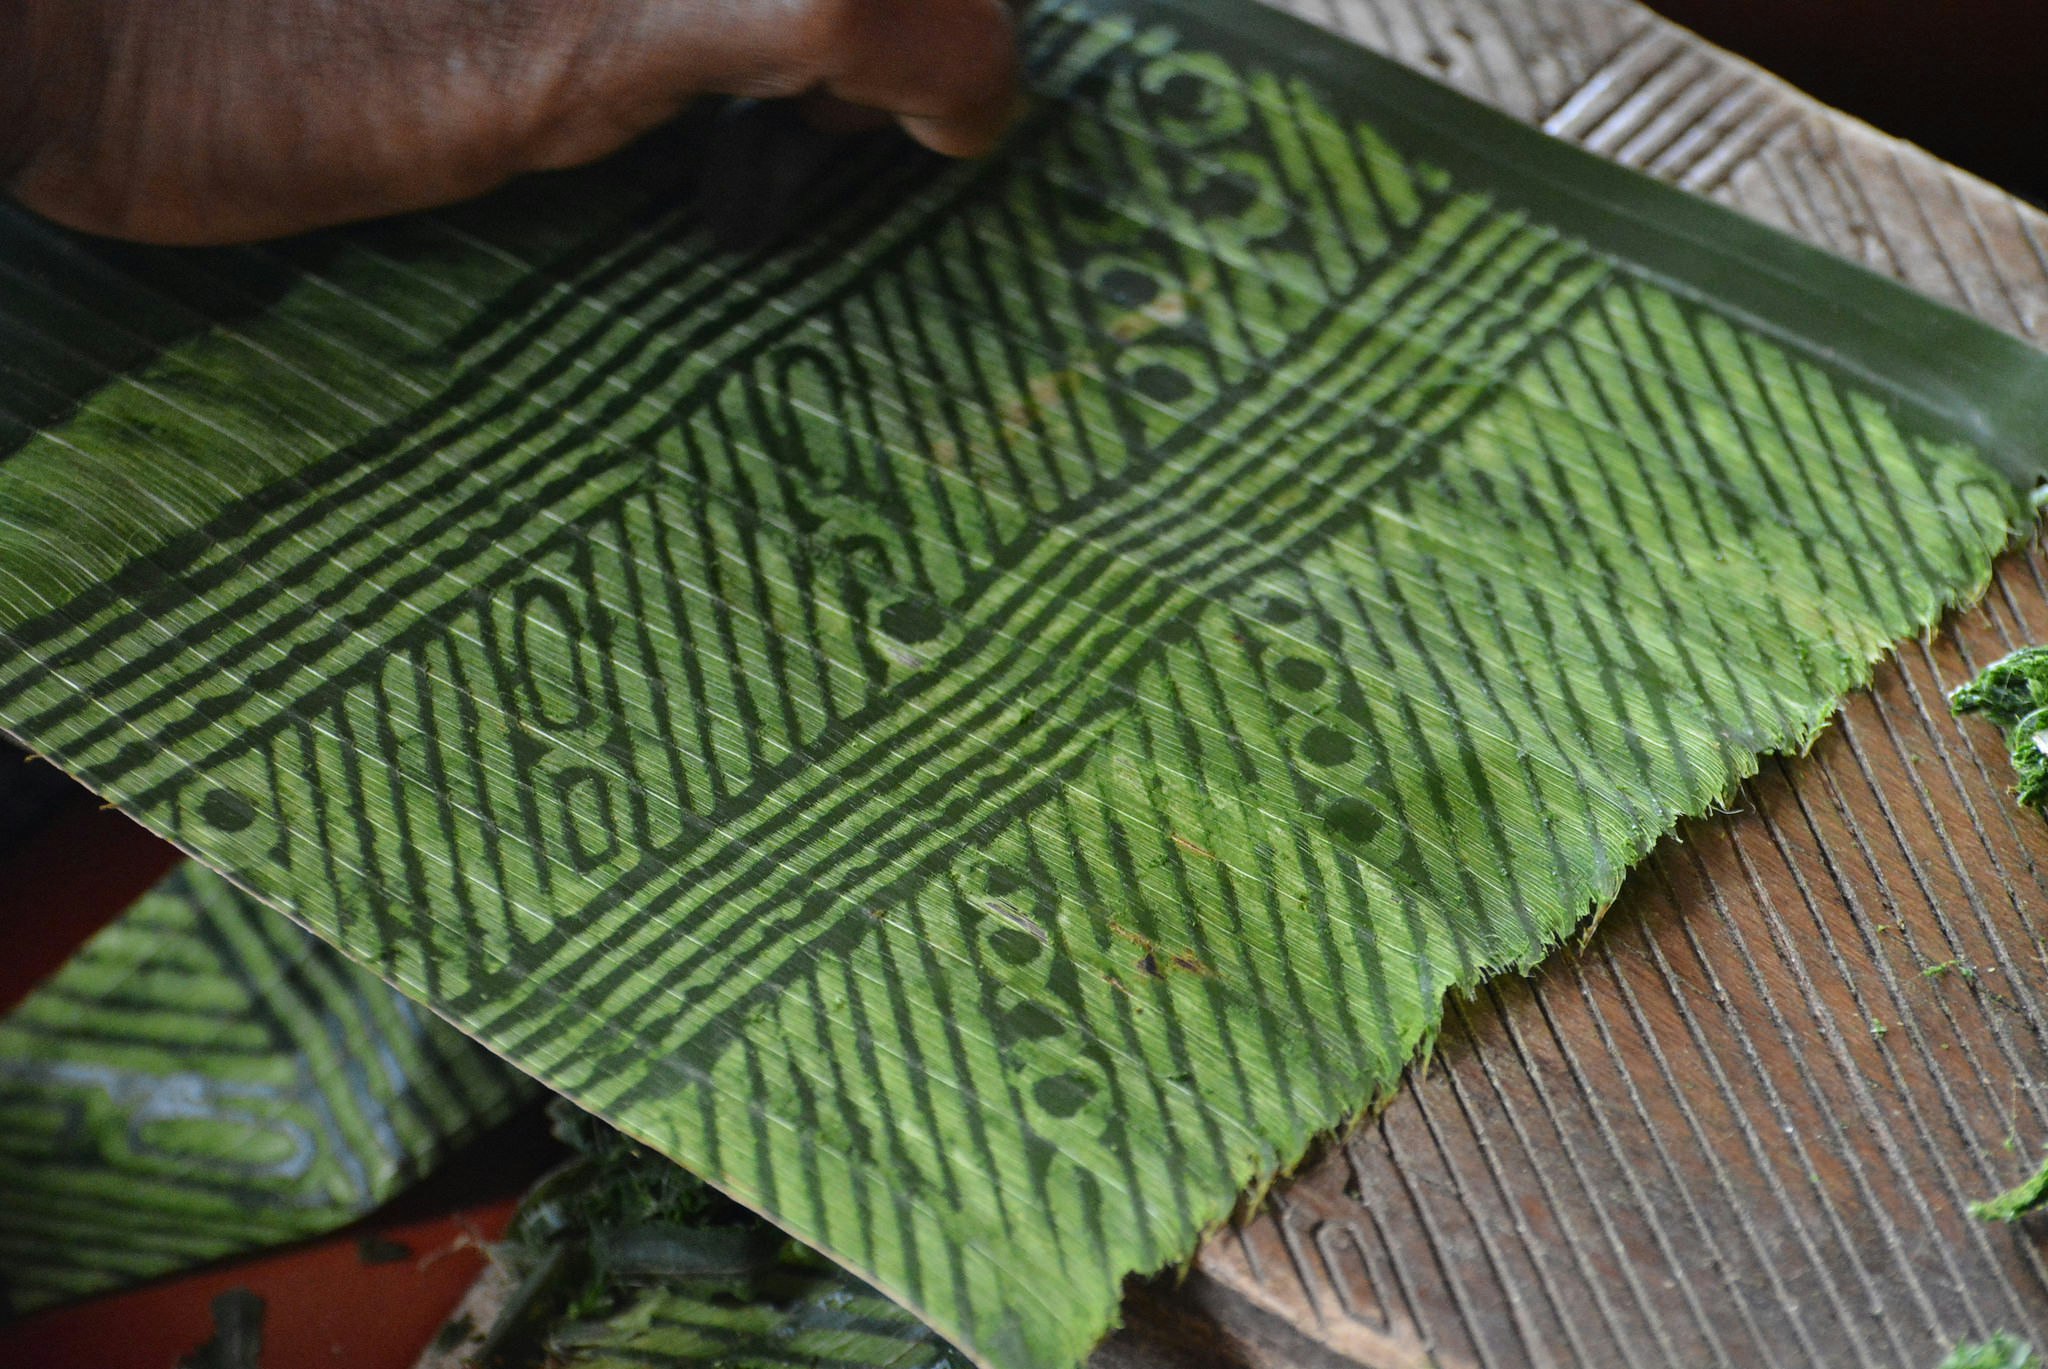 Patterned weave seen on the Trobriand Islands © Anna Kaminiski / Lonely Planet